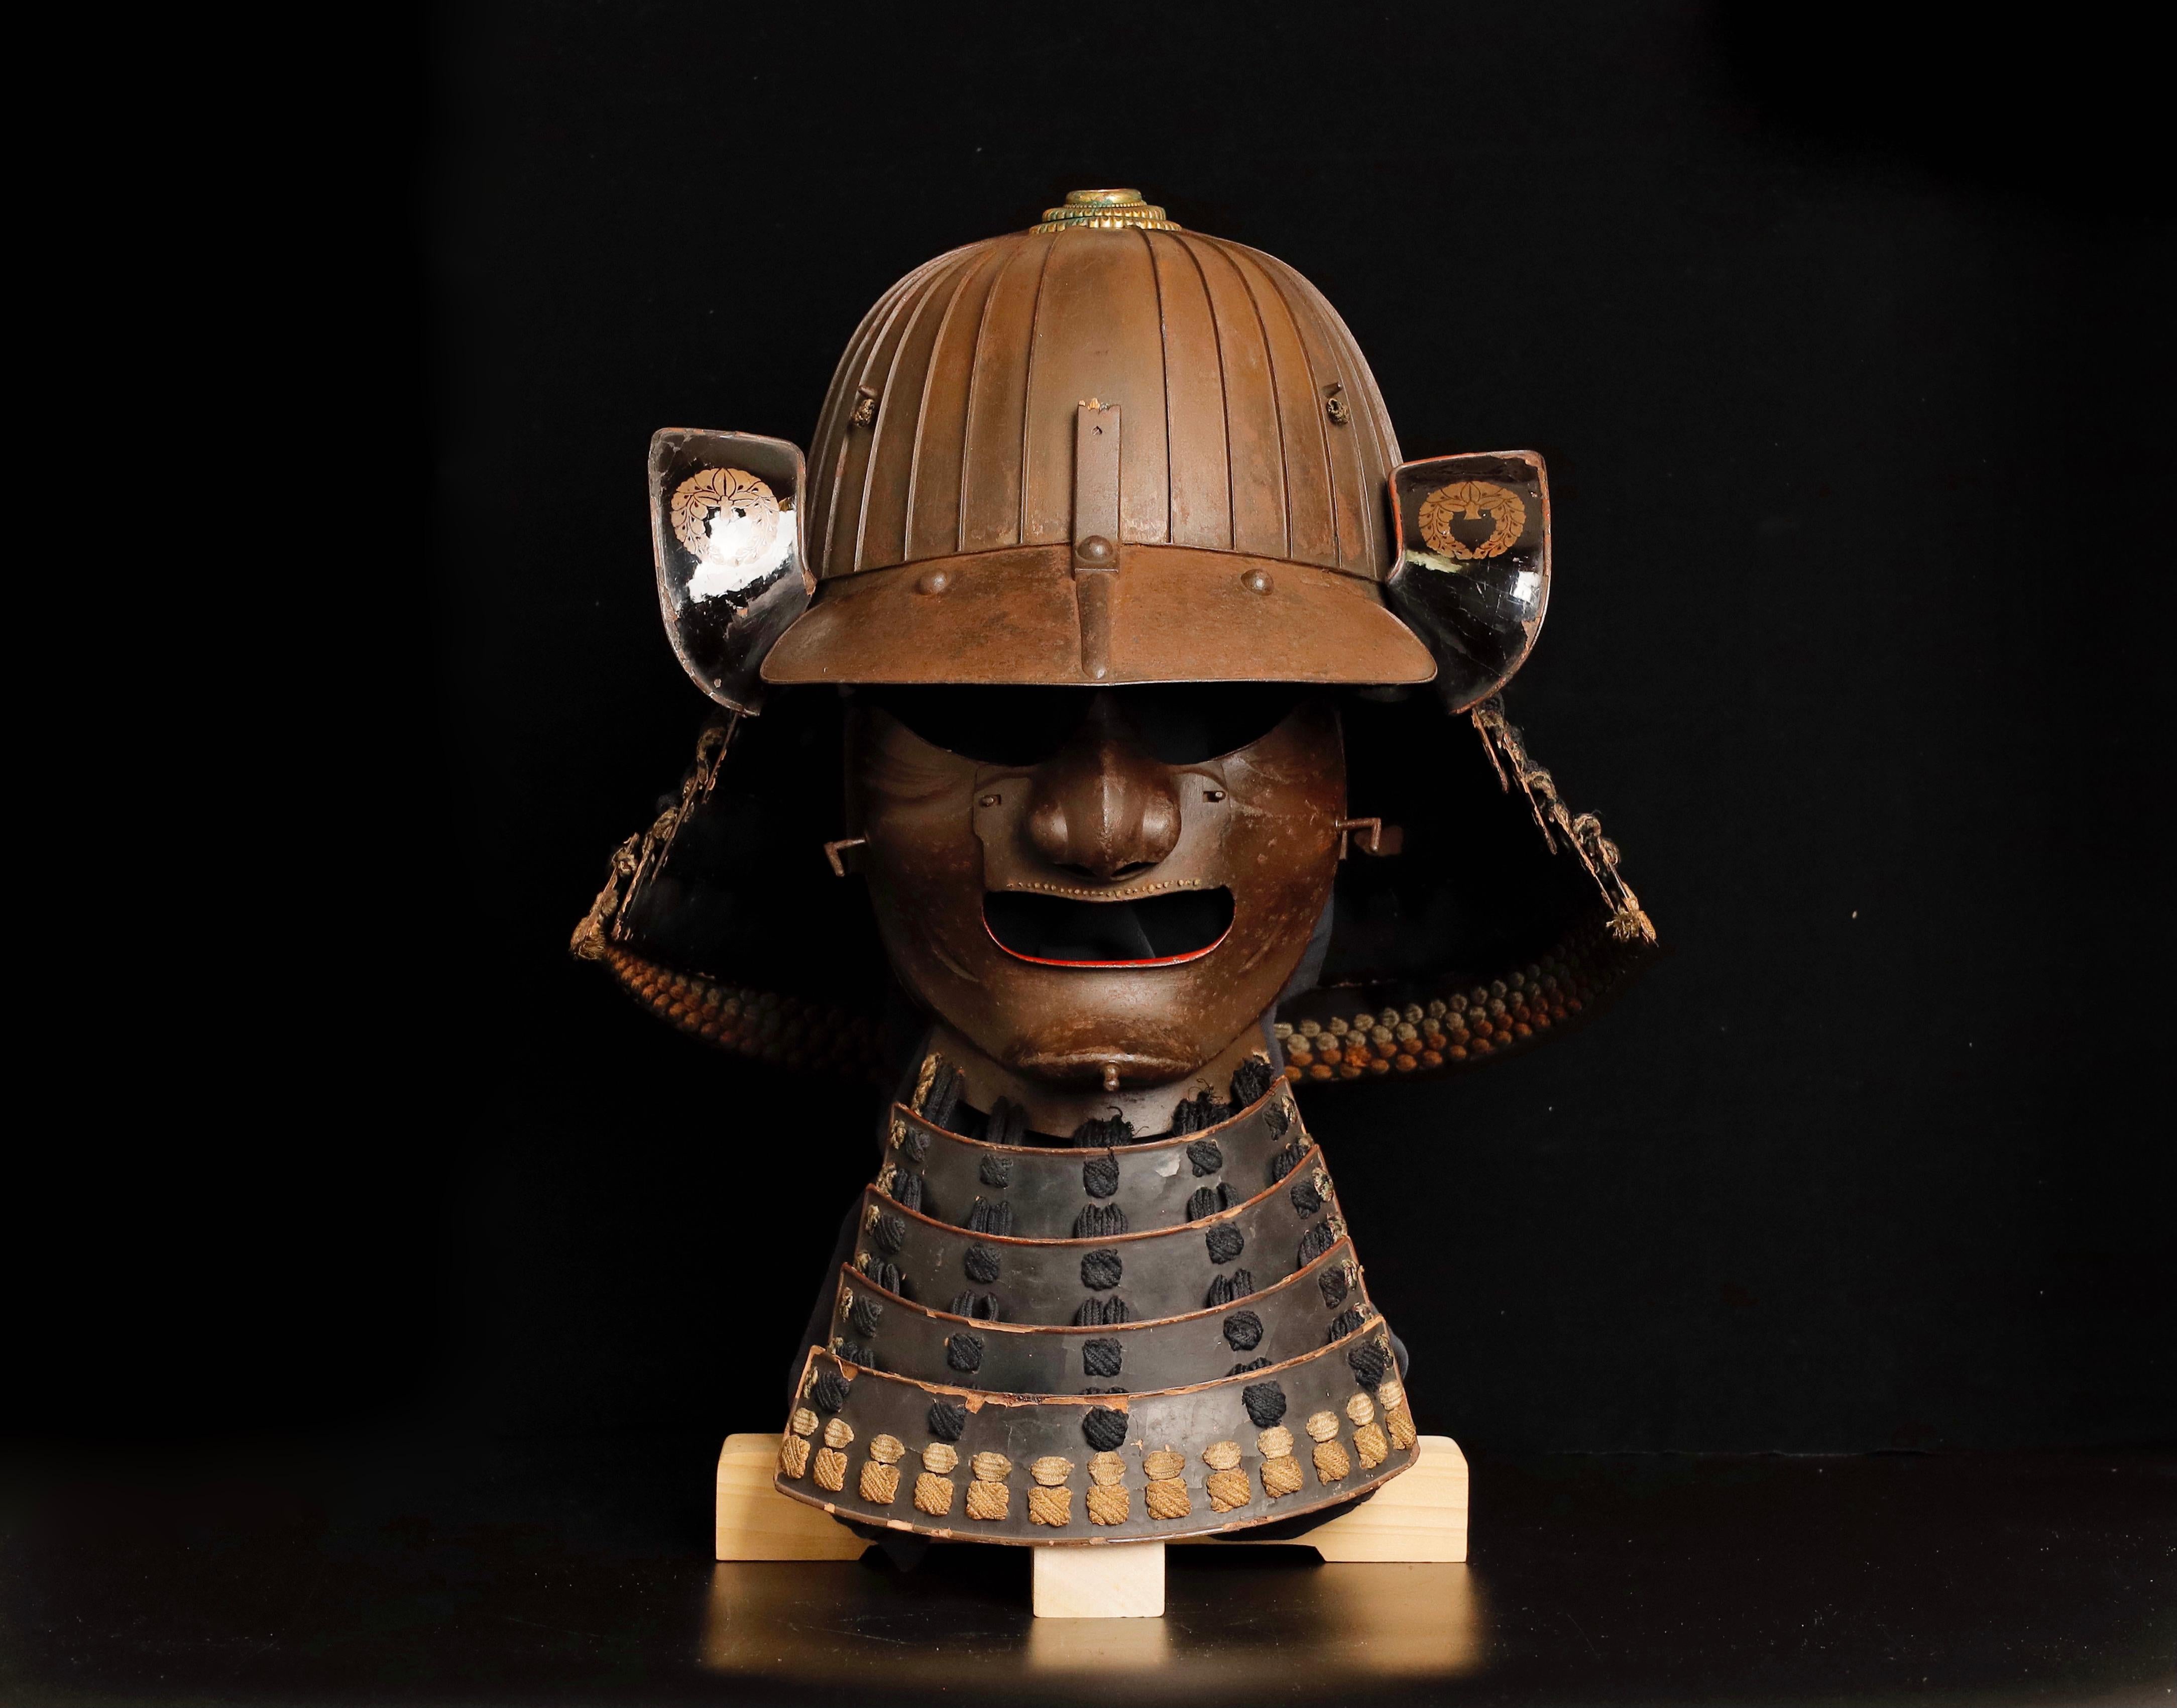 Edo-Era Samurai Helmet and Mask Set, an Authentic Piece of History from the 17th 3